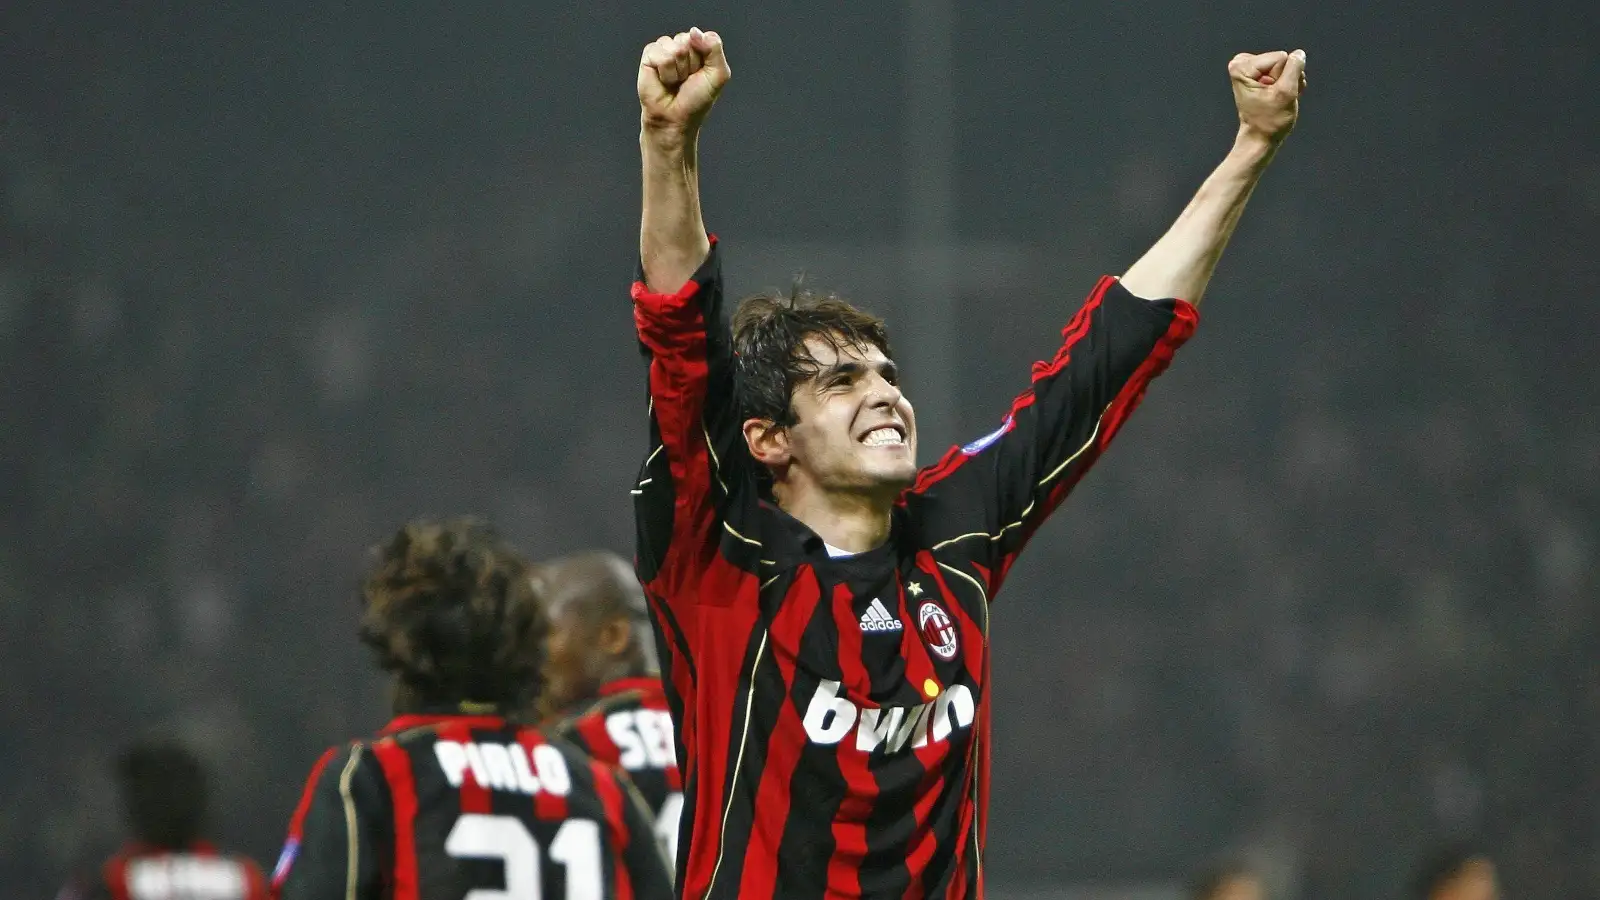 Remembering 7 times Kaka was one of the world’s best footballers